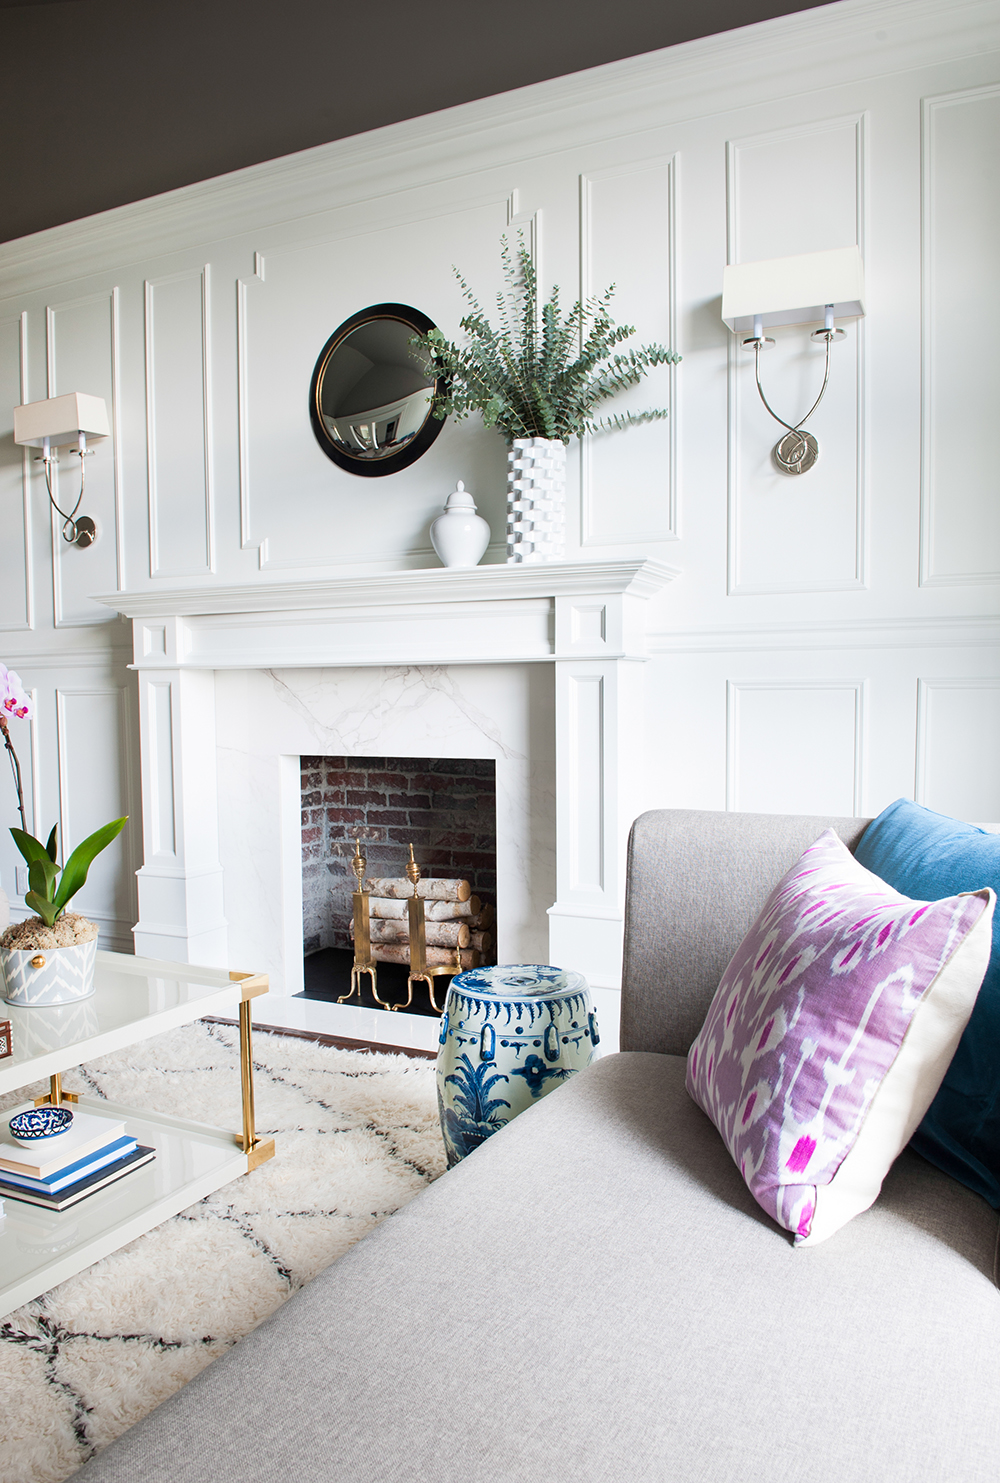 An original fireplace updated with modern marble and fresh paint.